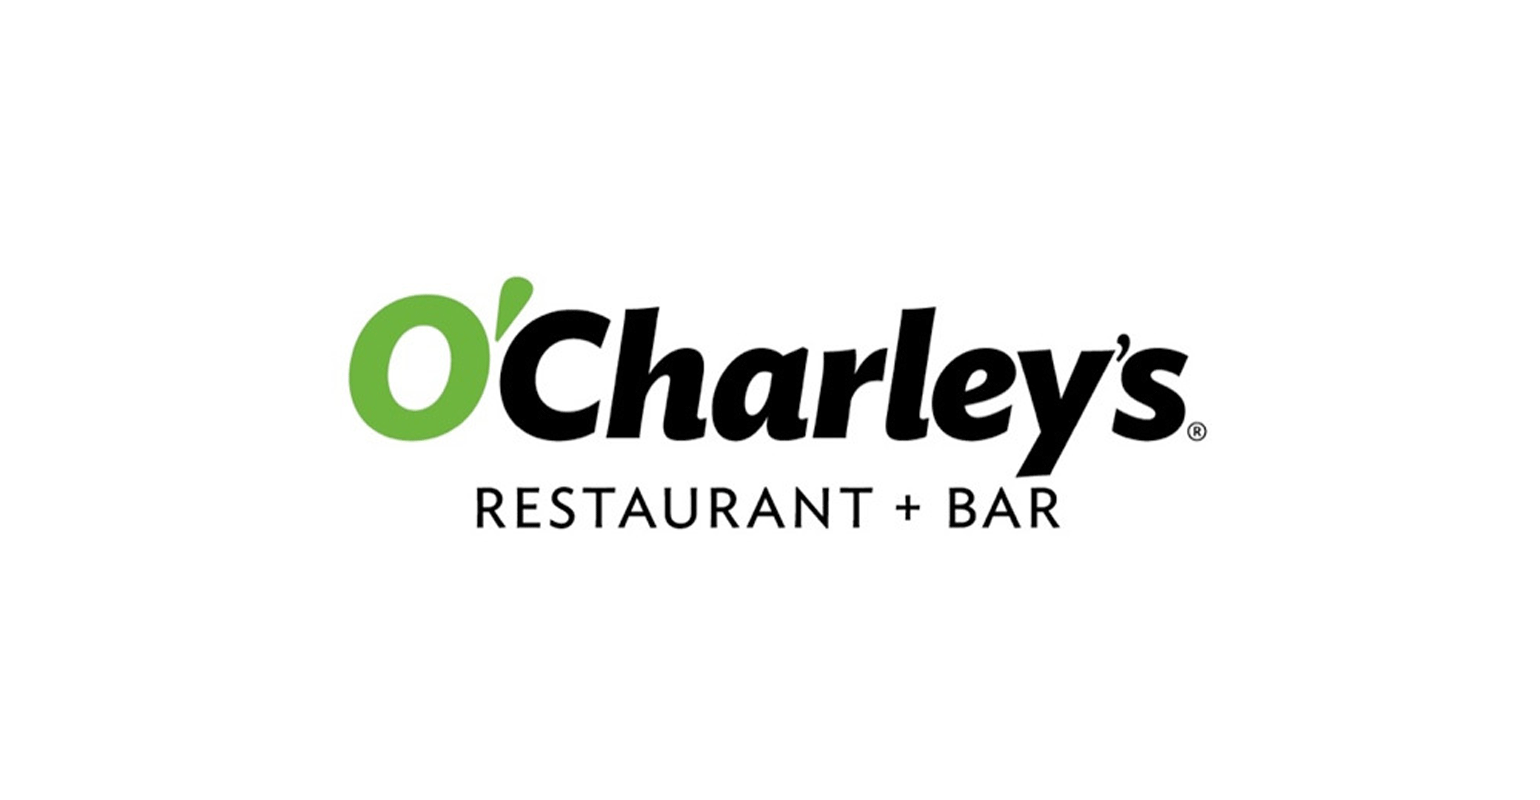 Is O'charley's Dining Room Open